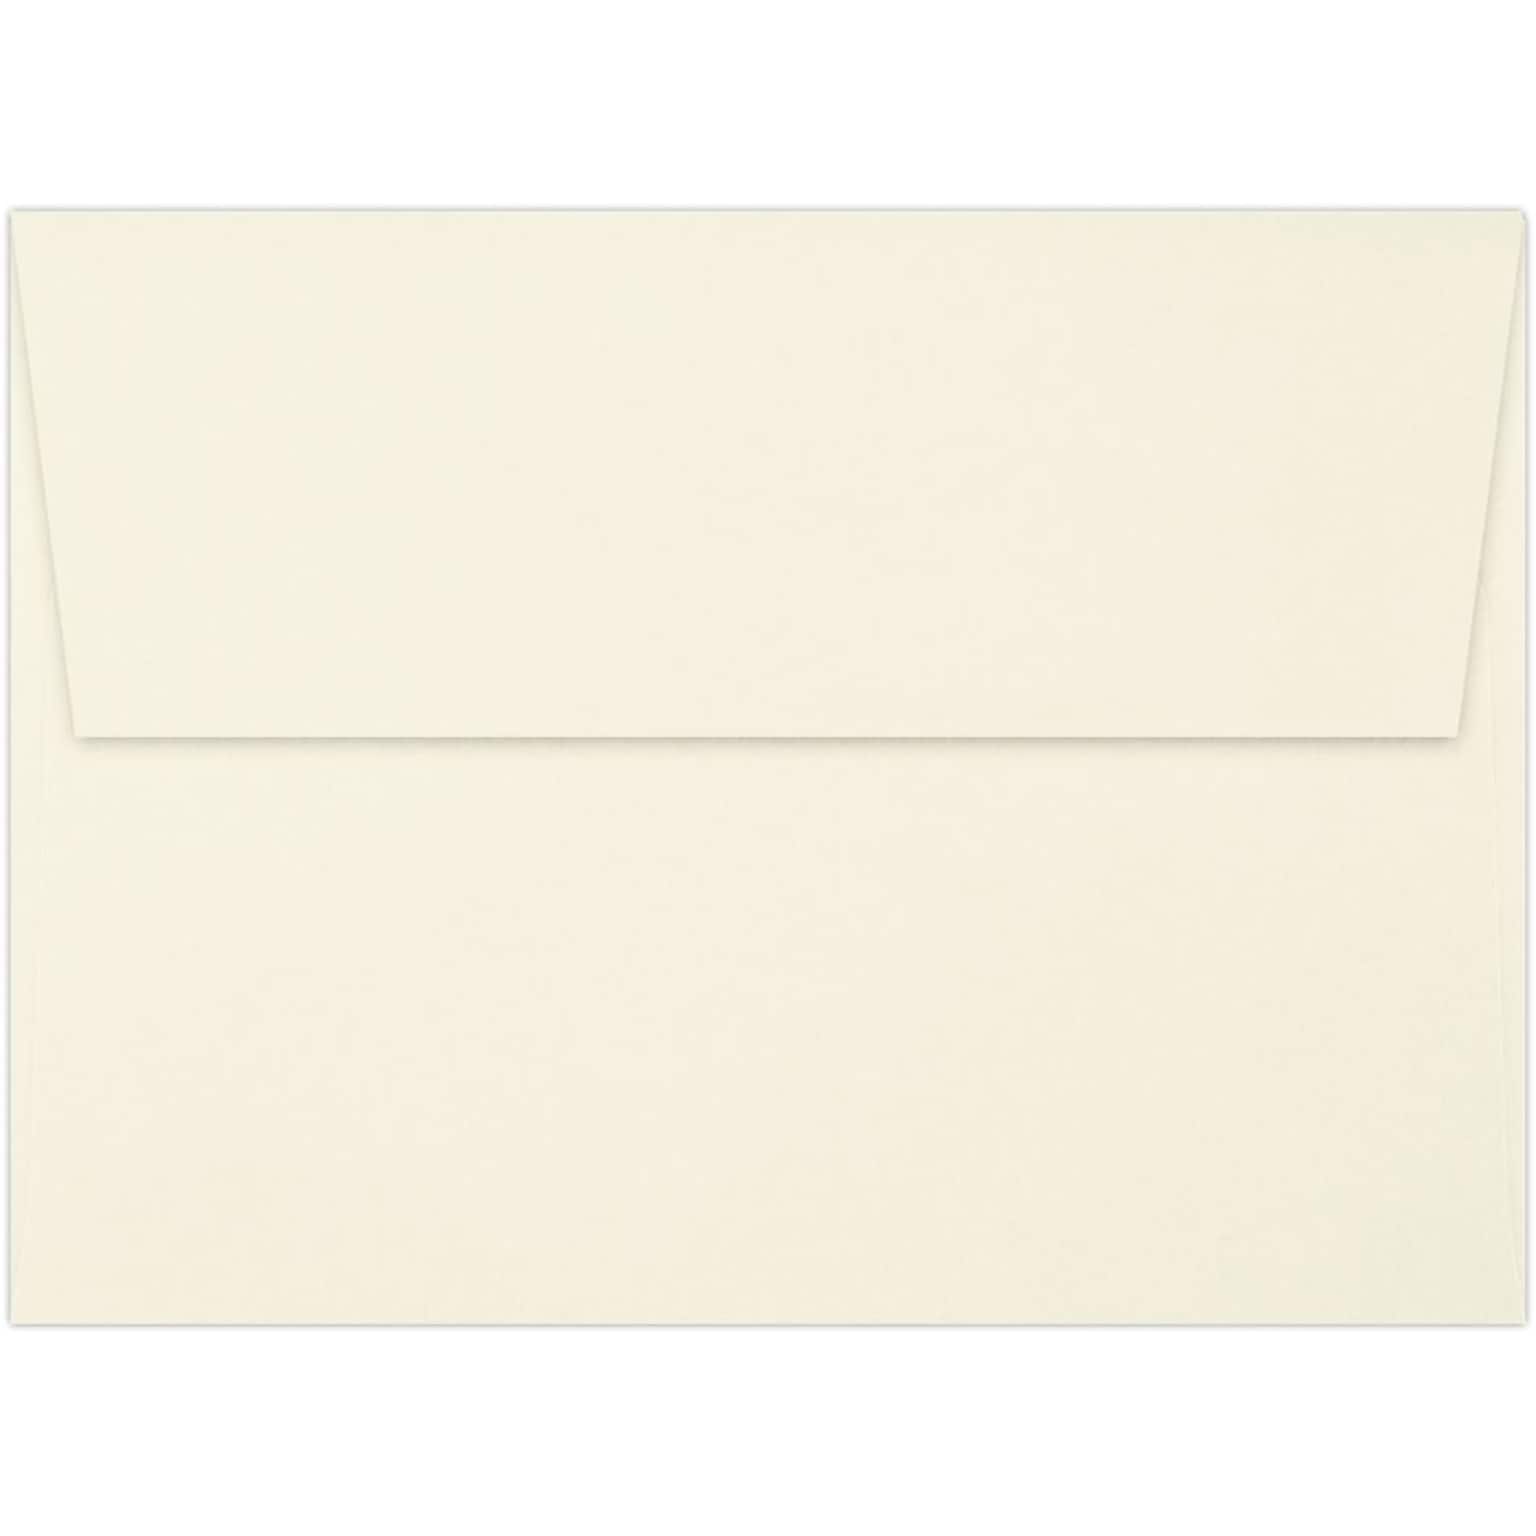 LUX A7 Invitation Envelopes (5 1/4 x 7 1/4) 1000/Pack, Classic Linen® Baronial Ivory (880-70BILI-1000)